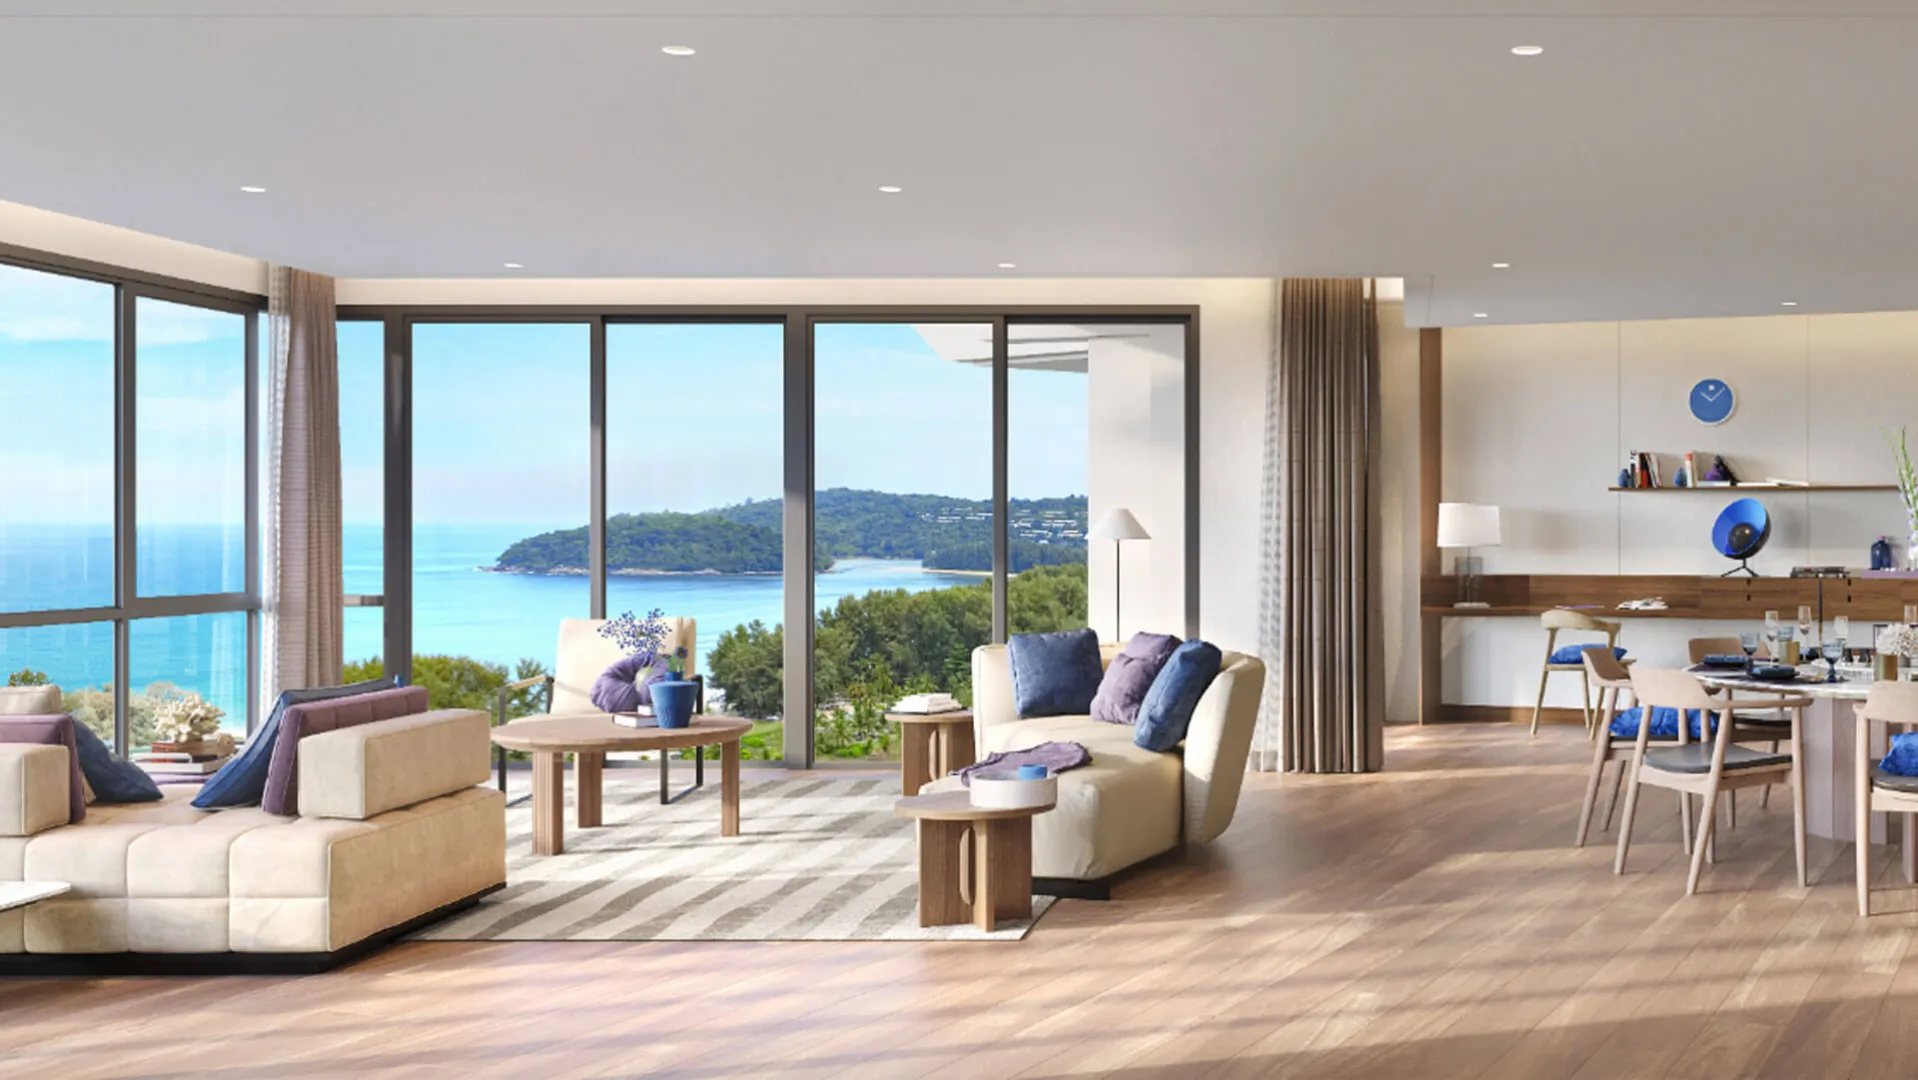 Modern living room with large windows offering a panoramic view of a coastal landscape, furnished with sofas, a dining table.